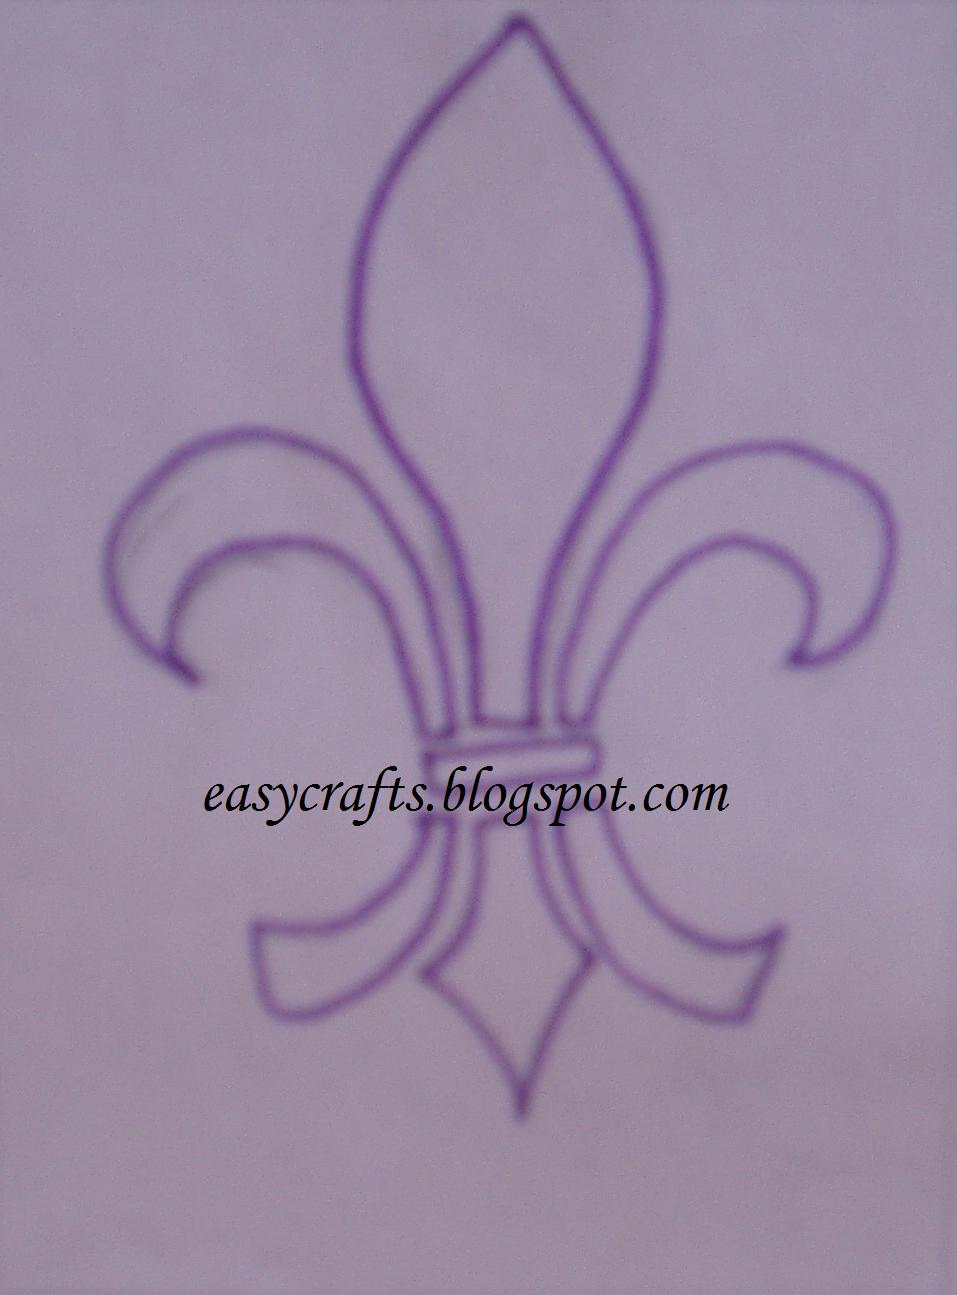 Easy Crafts - Explore your creativity: Stencil Painting